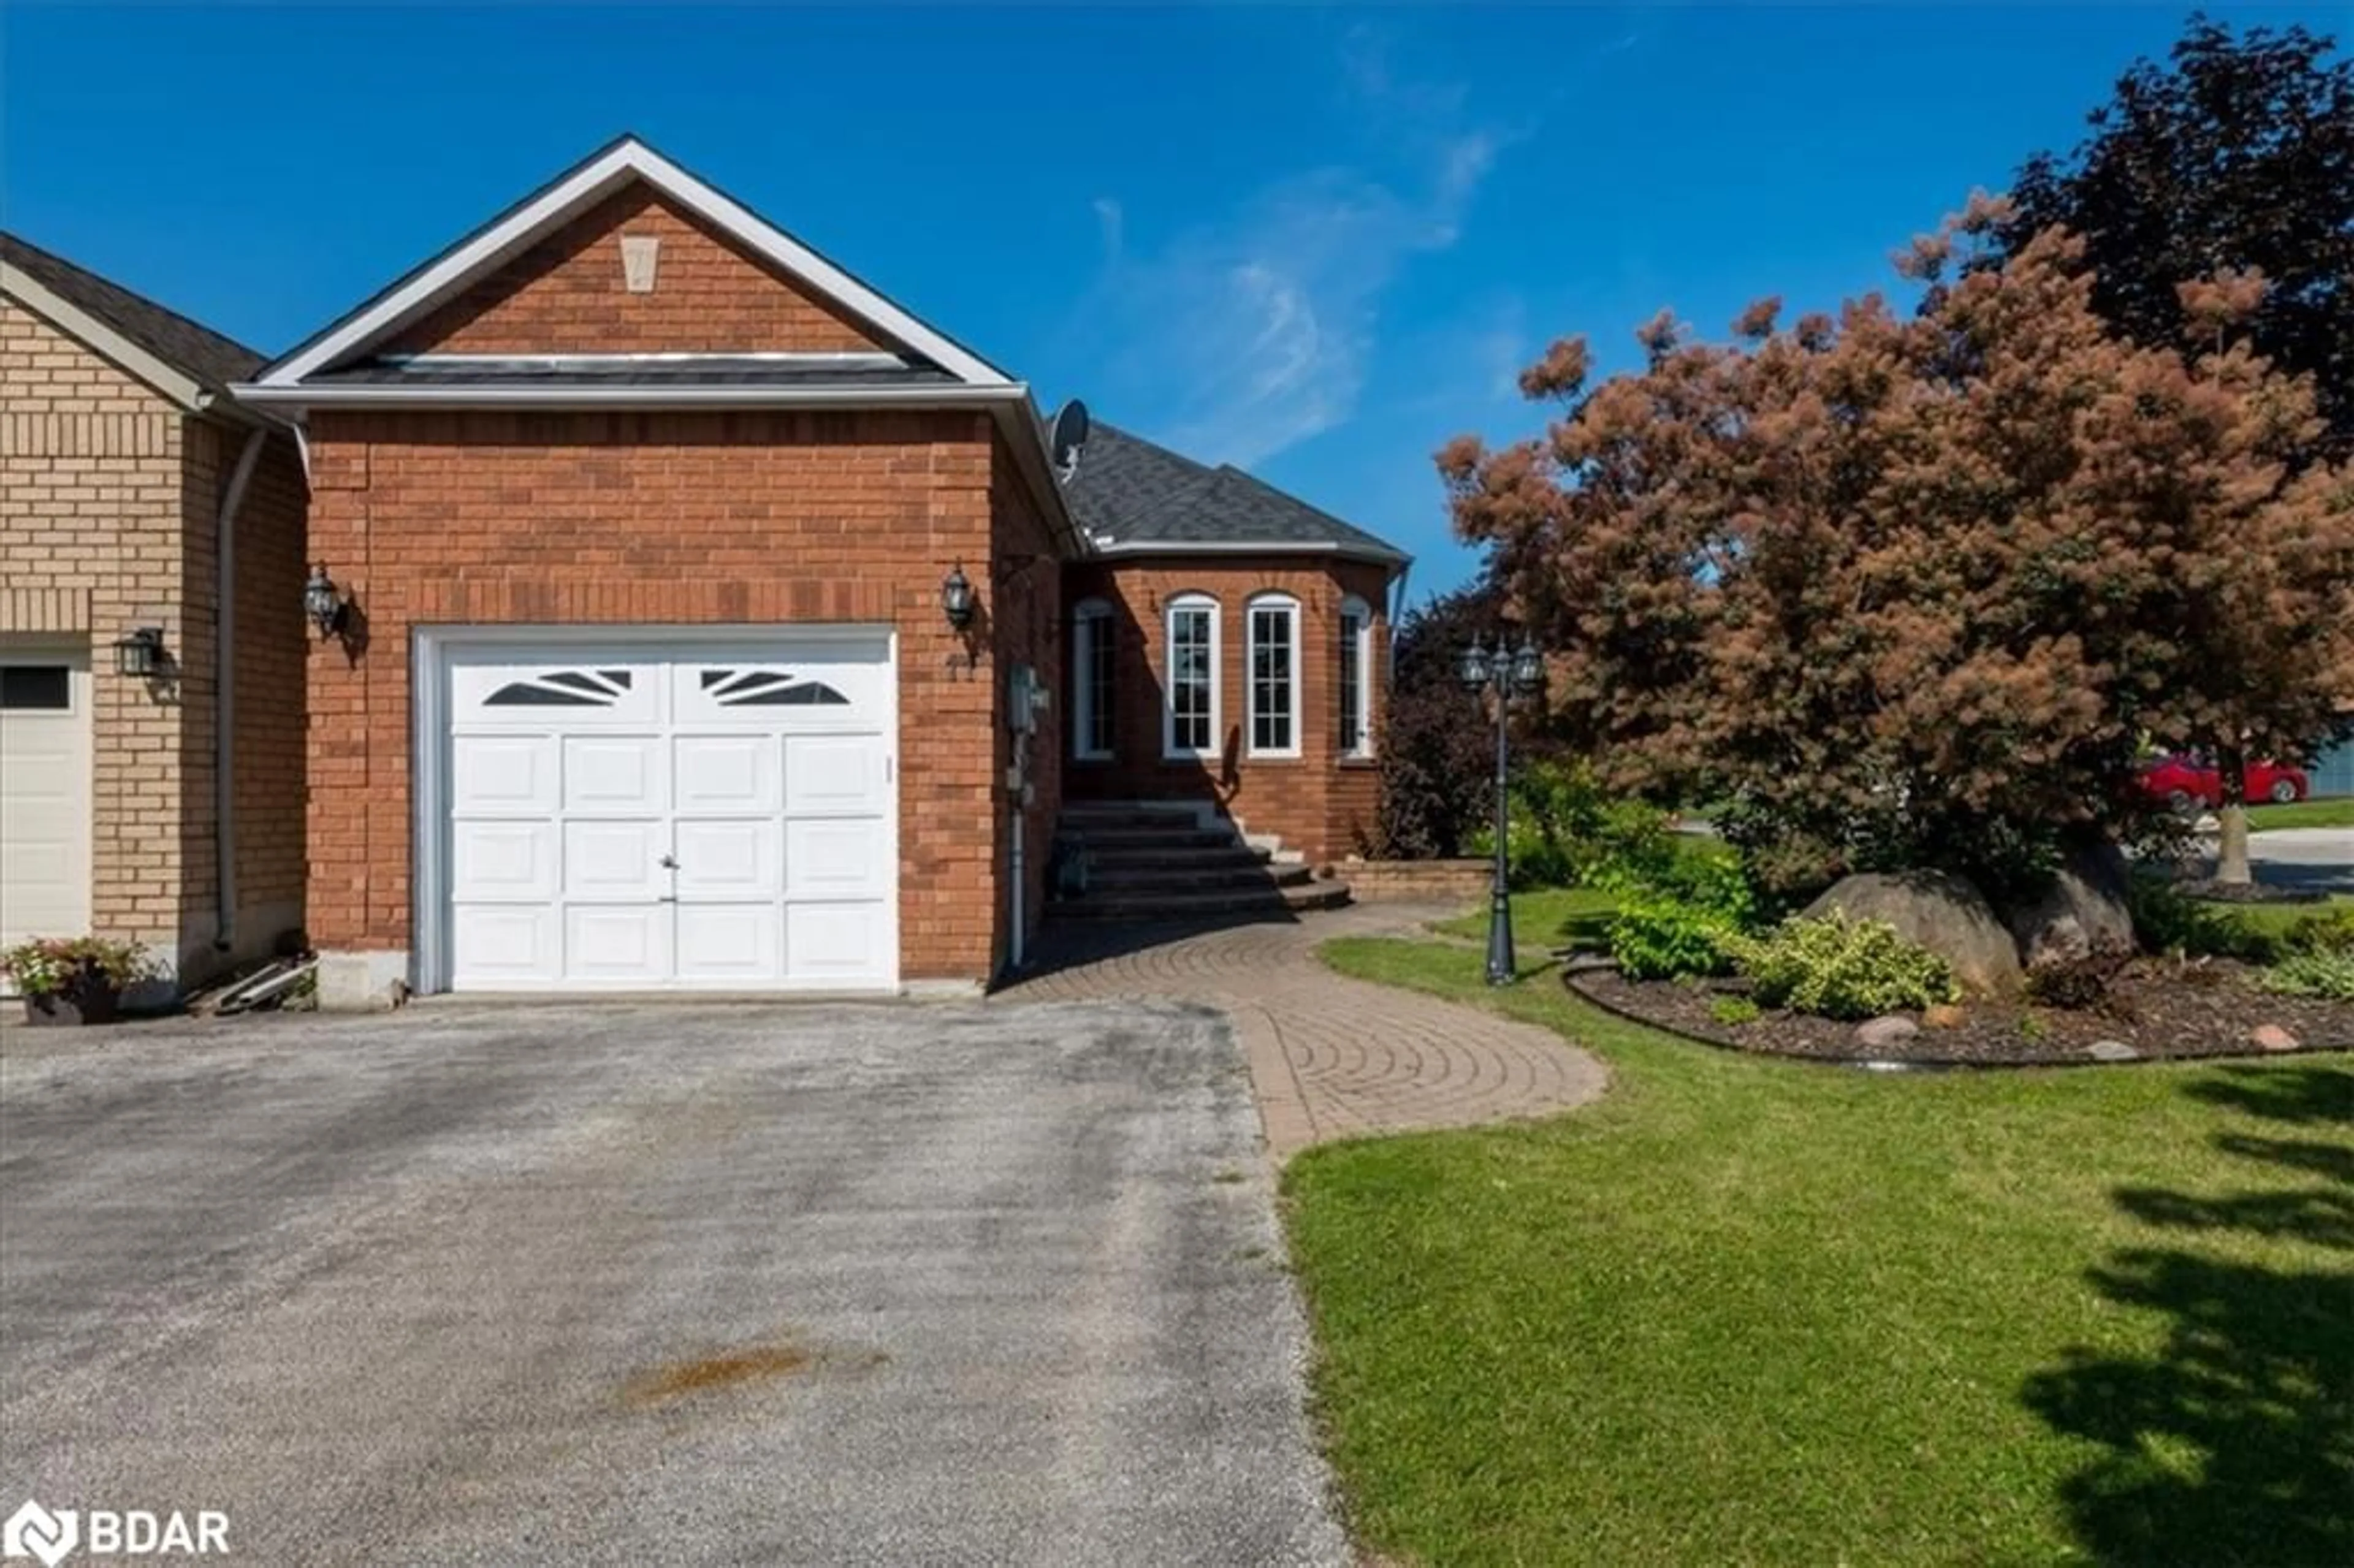 Home with brick exterior material for 11 Aikens Cres, Barrie Ontario L4N 8M6